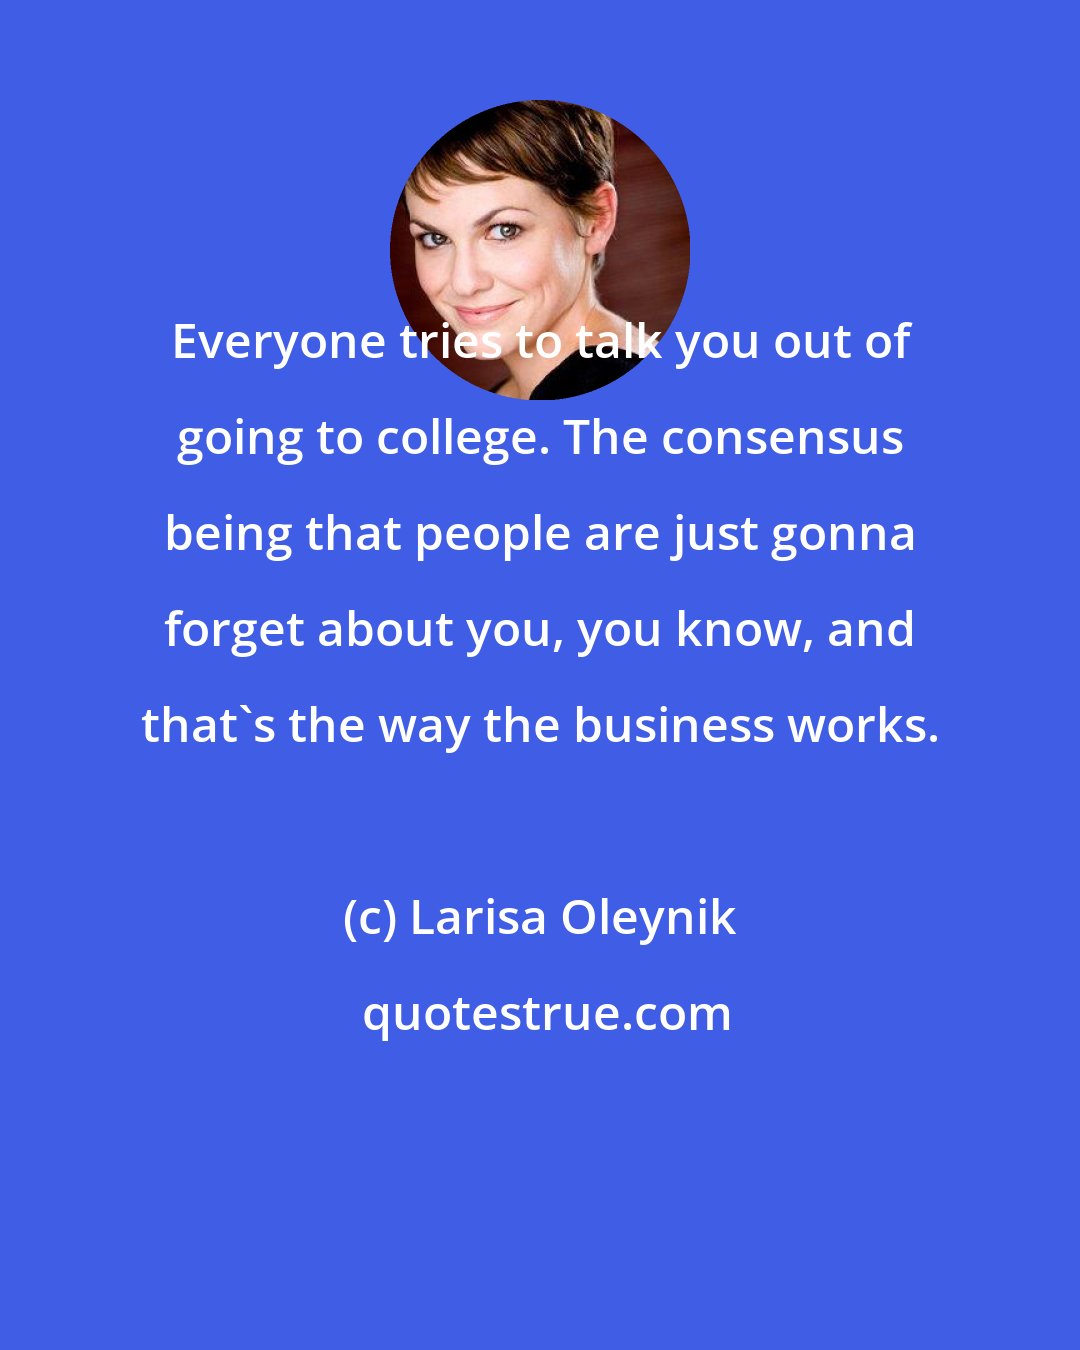 Larisa Oleynik: Everyone tries to talk you out of going to college. The consensus being that people are just gonna forget about you, you know, and that's the way the business works.